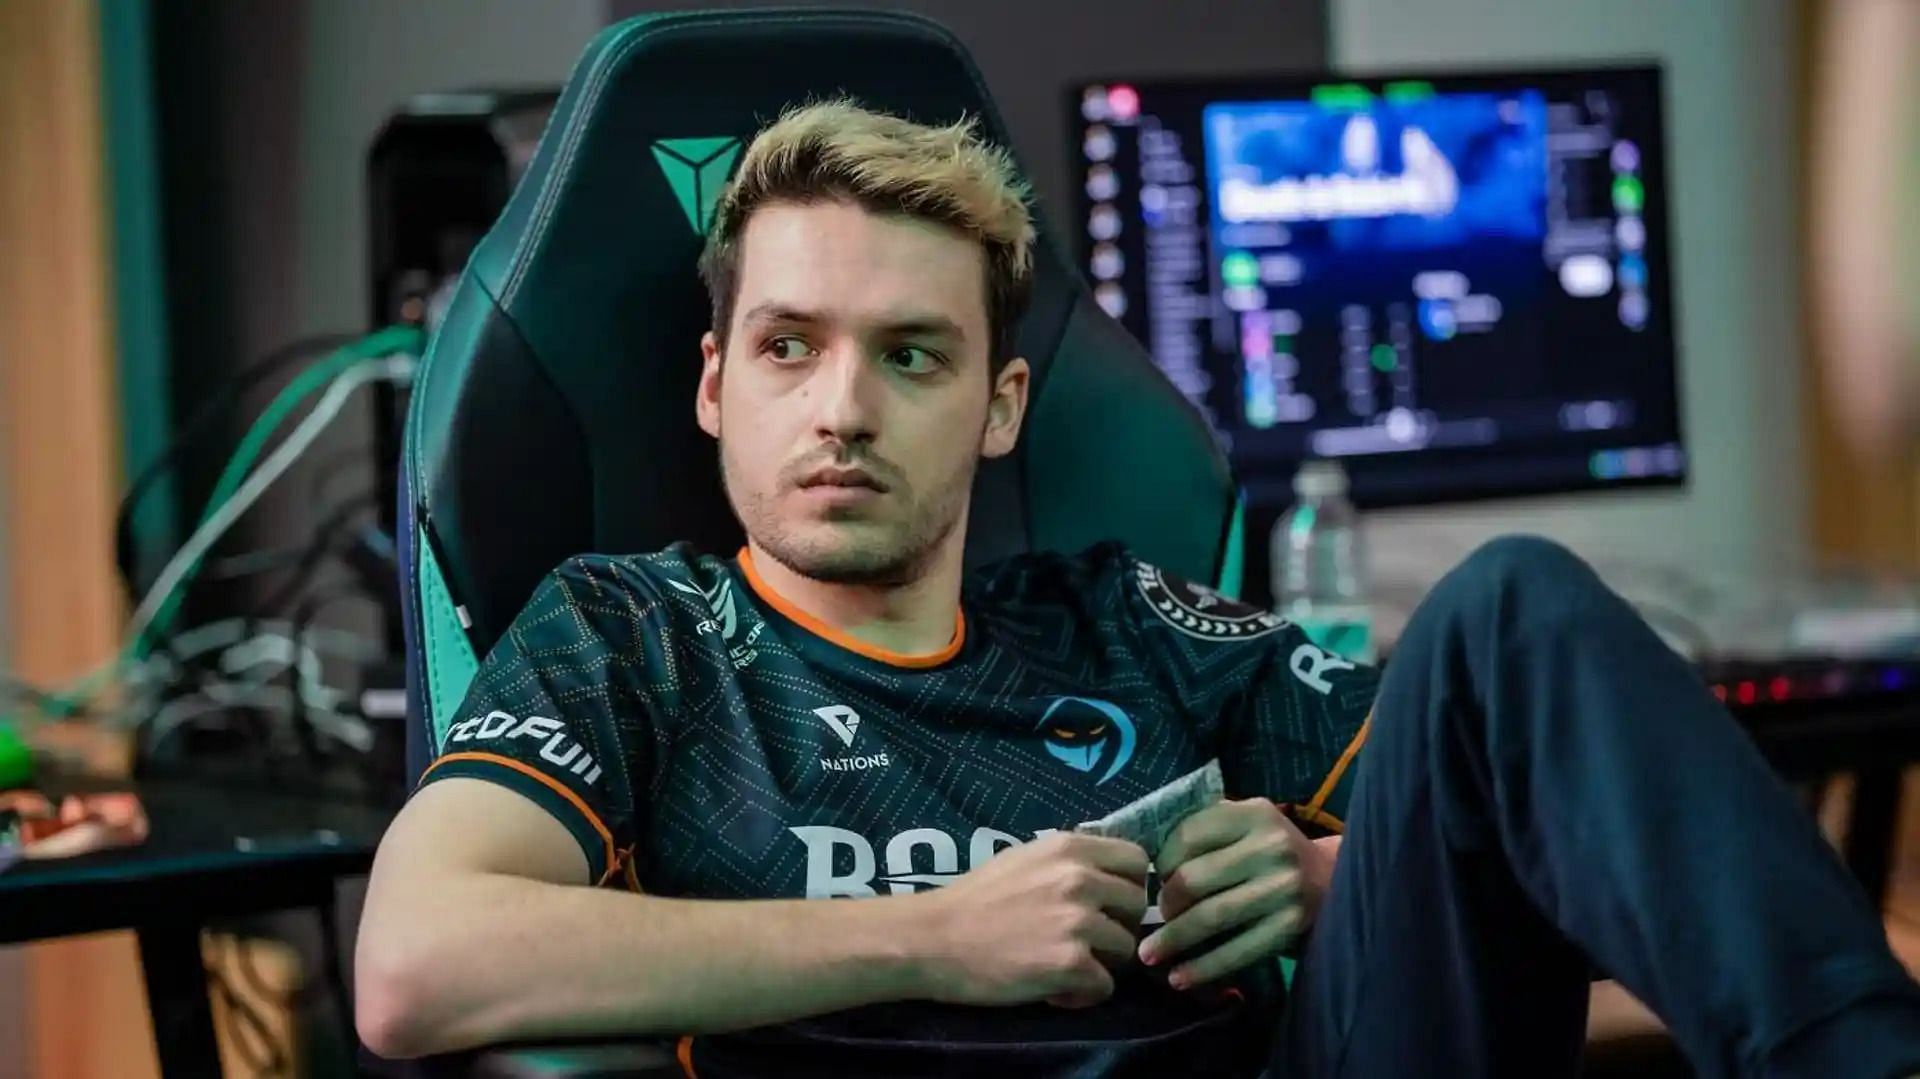 Odoamne helped Rogue become the only Western contender to make it past the group stage of the League of Legends Worlds 2022 (Image via Riot Games)